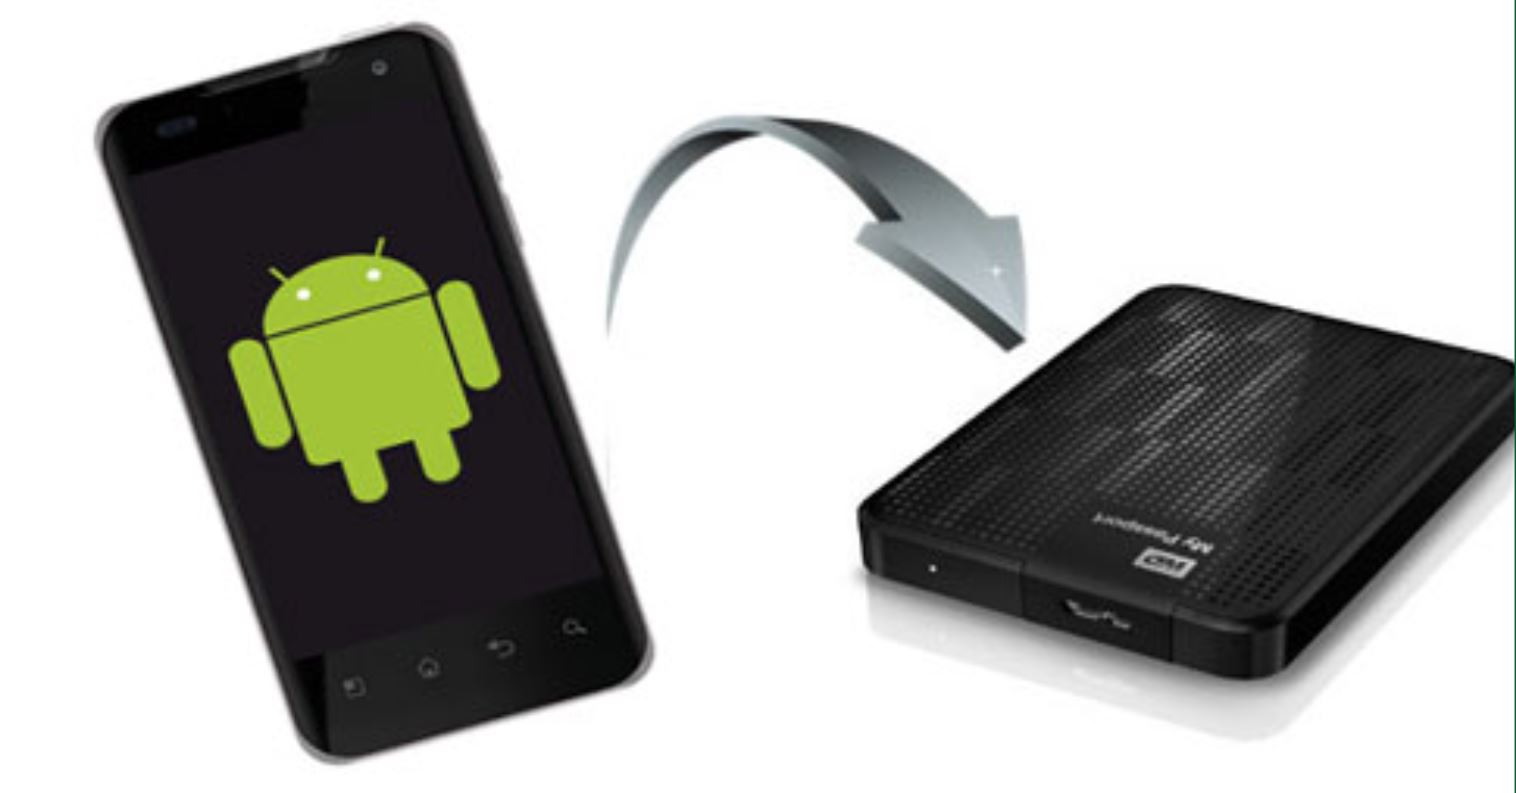 How To Transfer Photos From Android To External Hard Drive